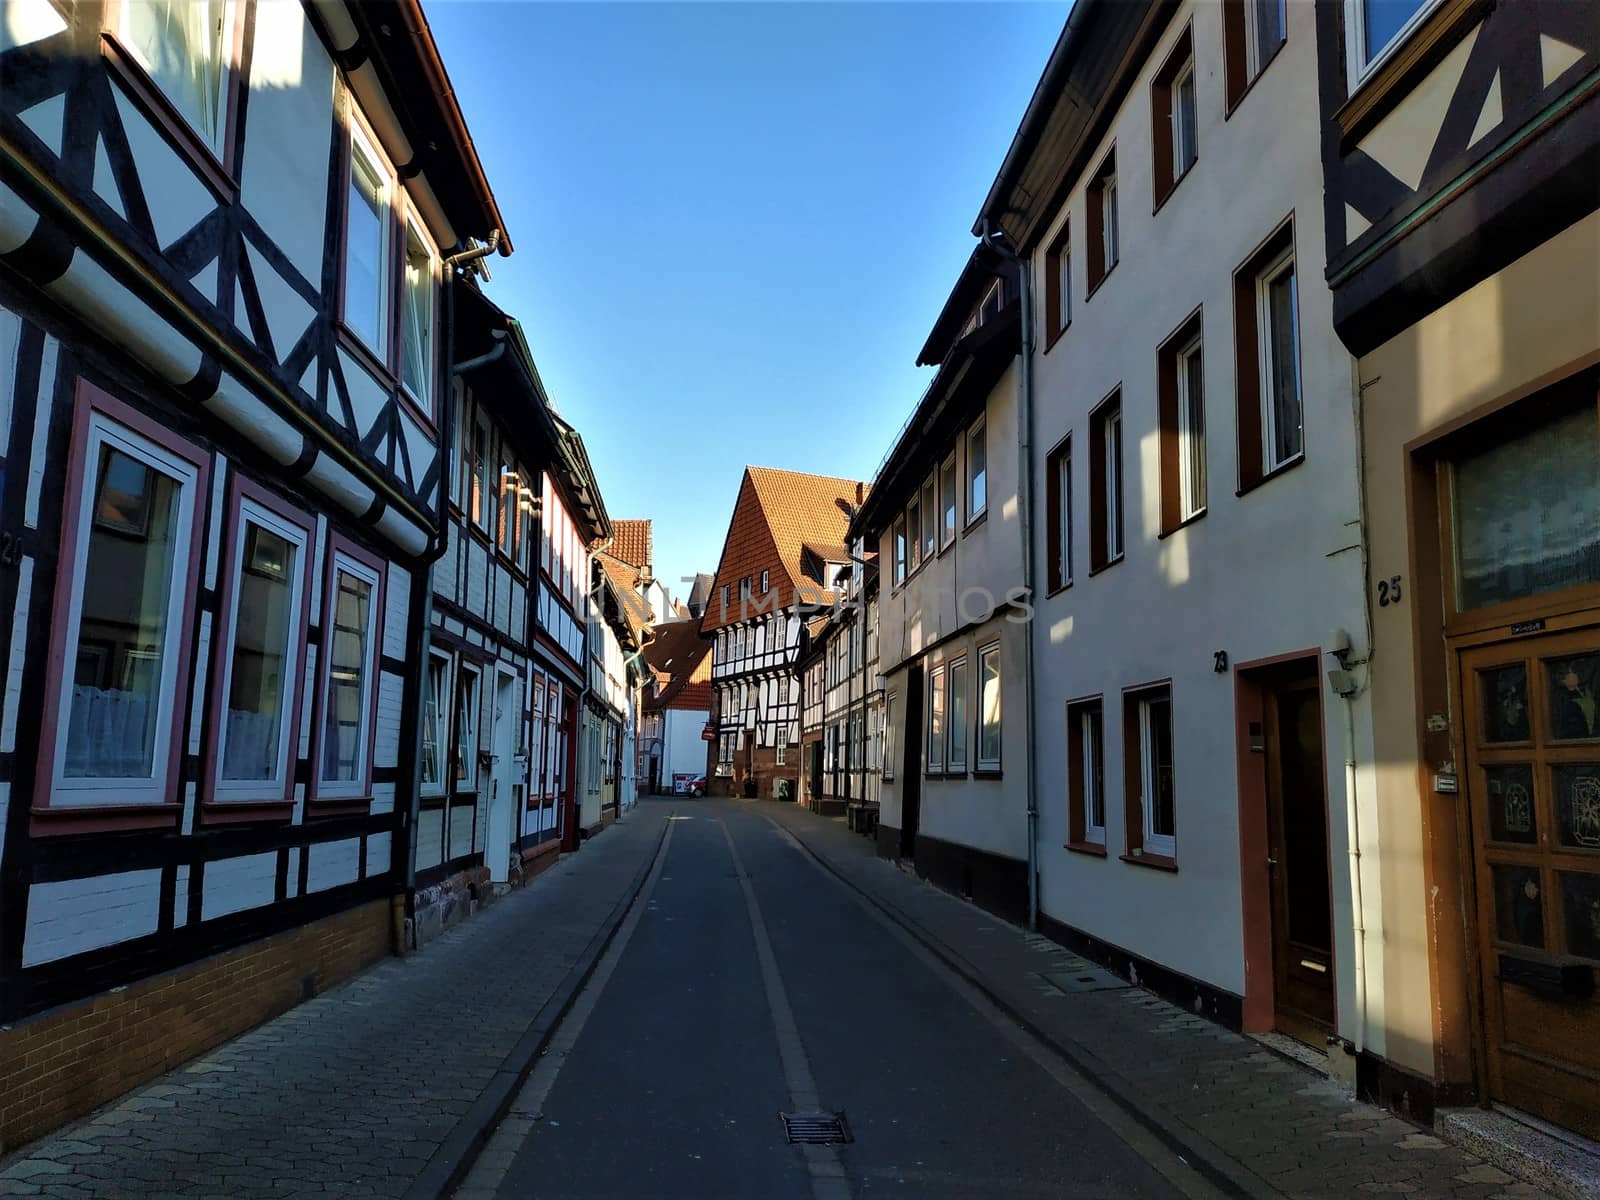 Street with half timbered houses in the old town of Einbeck, Germany